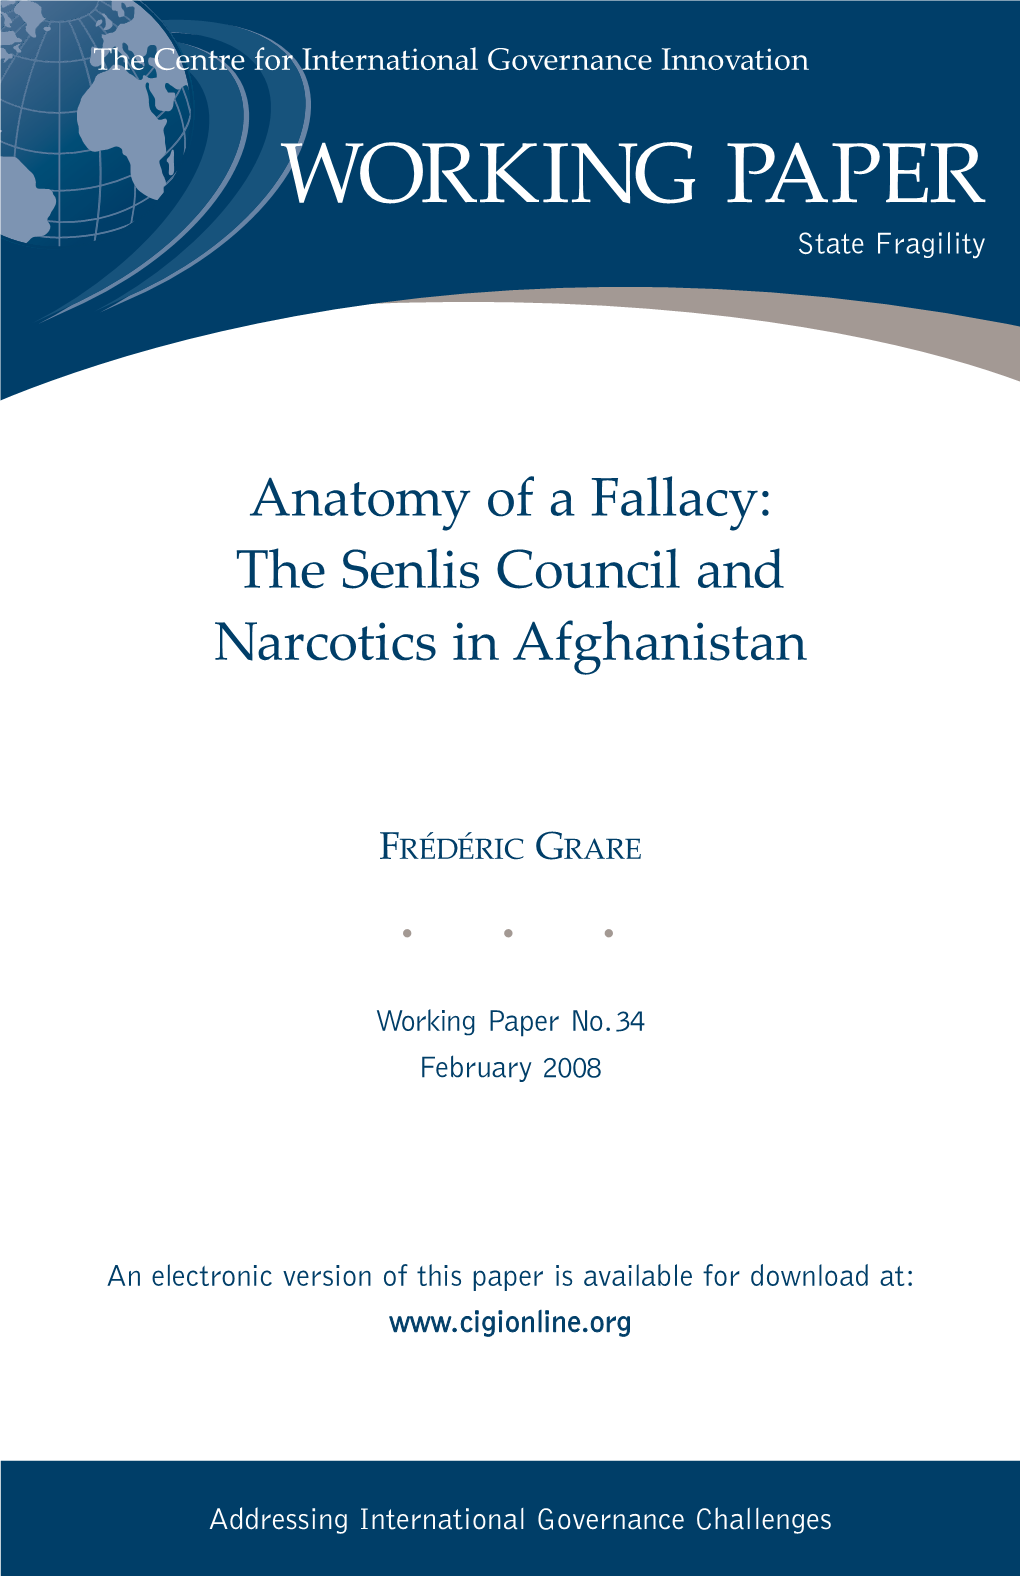 Anatomy of a Fallacy: the Senlis Council and Narcotics in Afghanistan